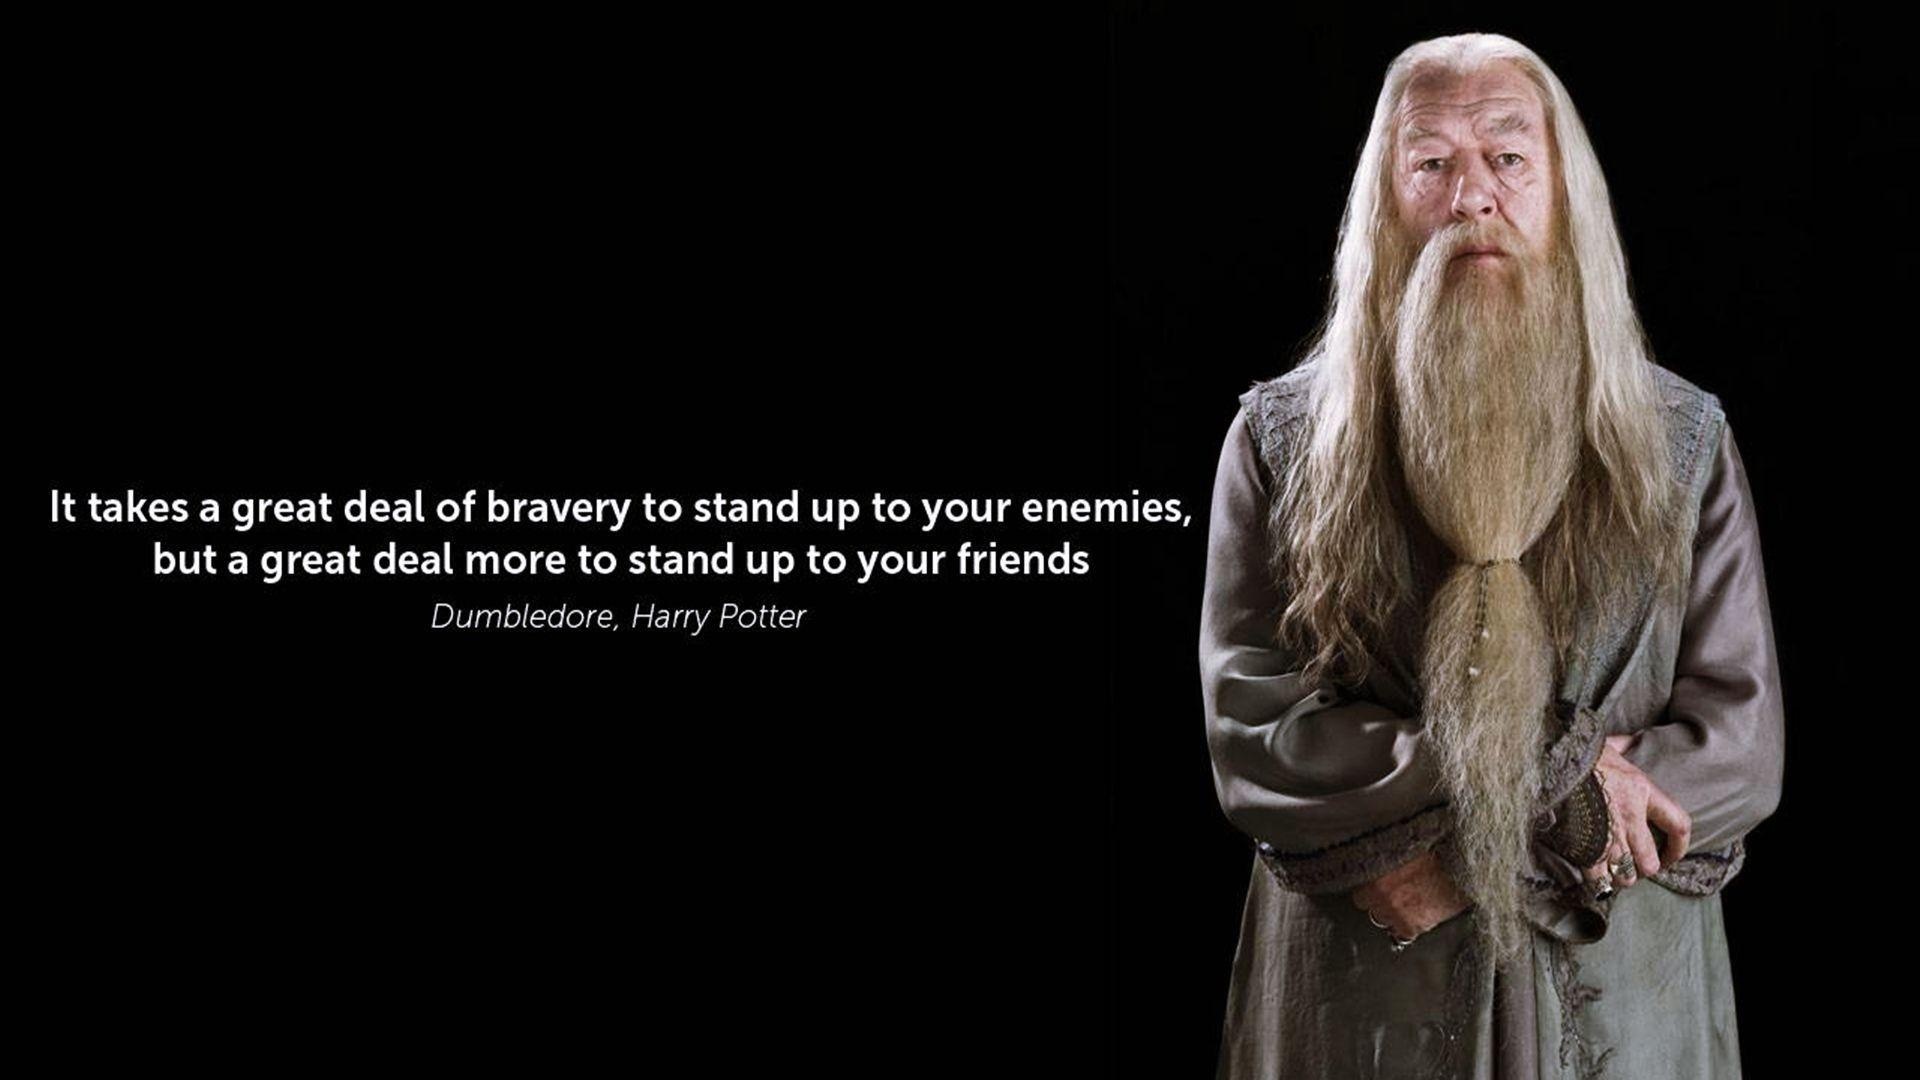 Dumbledore: Albus, Served as Supreme Mugwump of the International Confederation of Wizards. 1920x1080 Full HD Background.